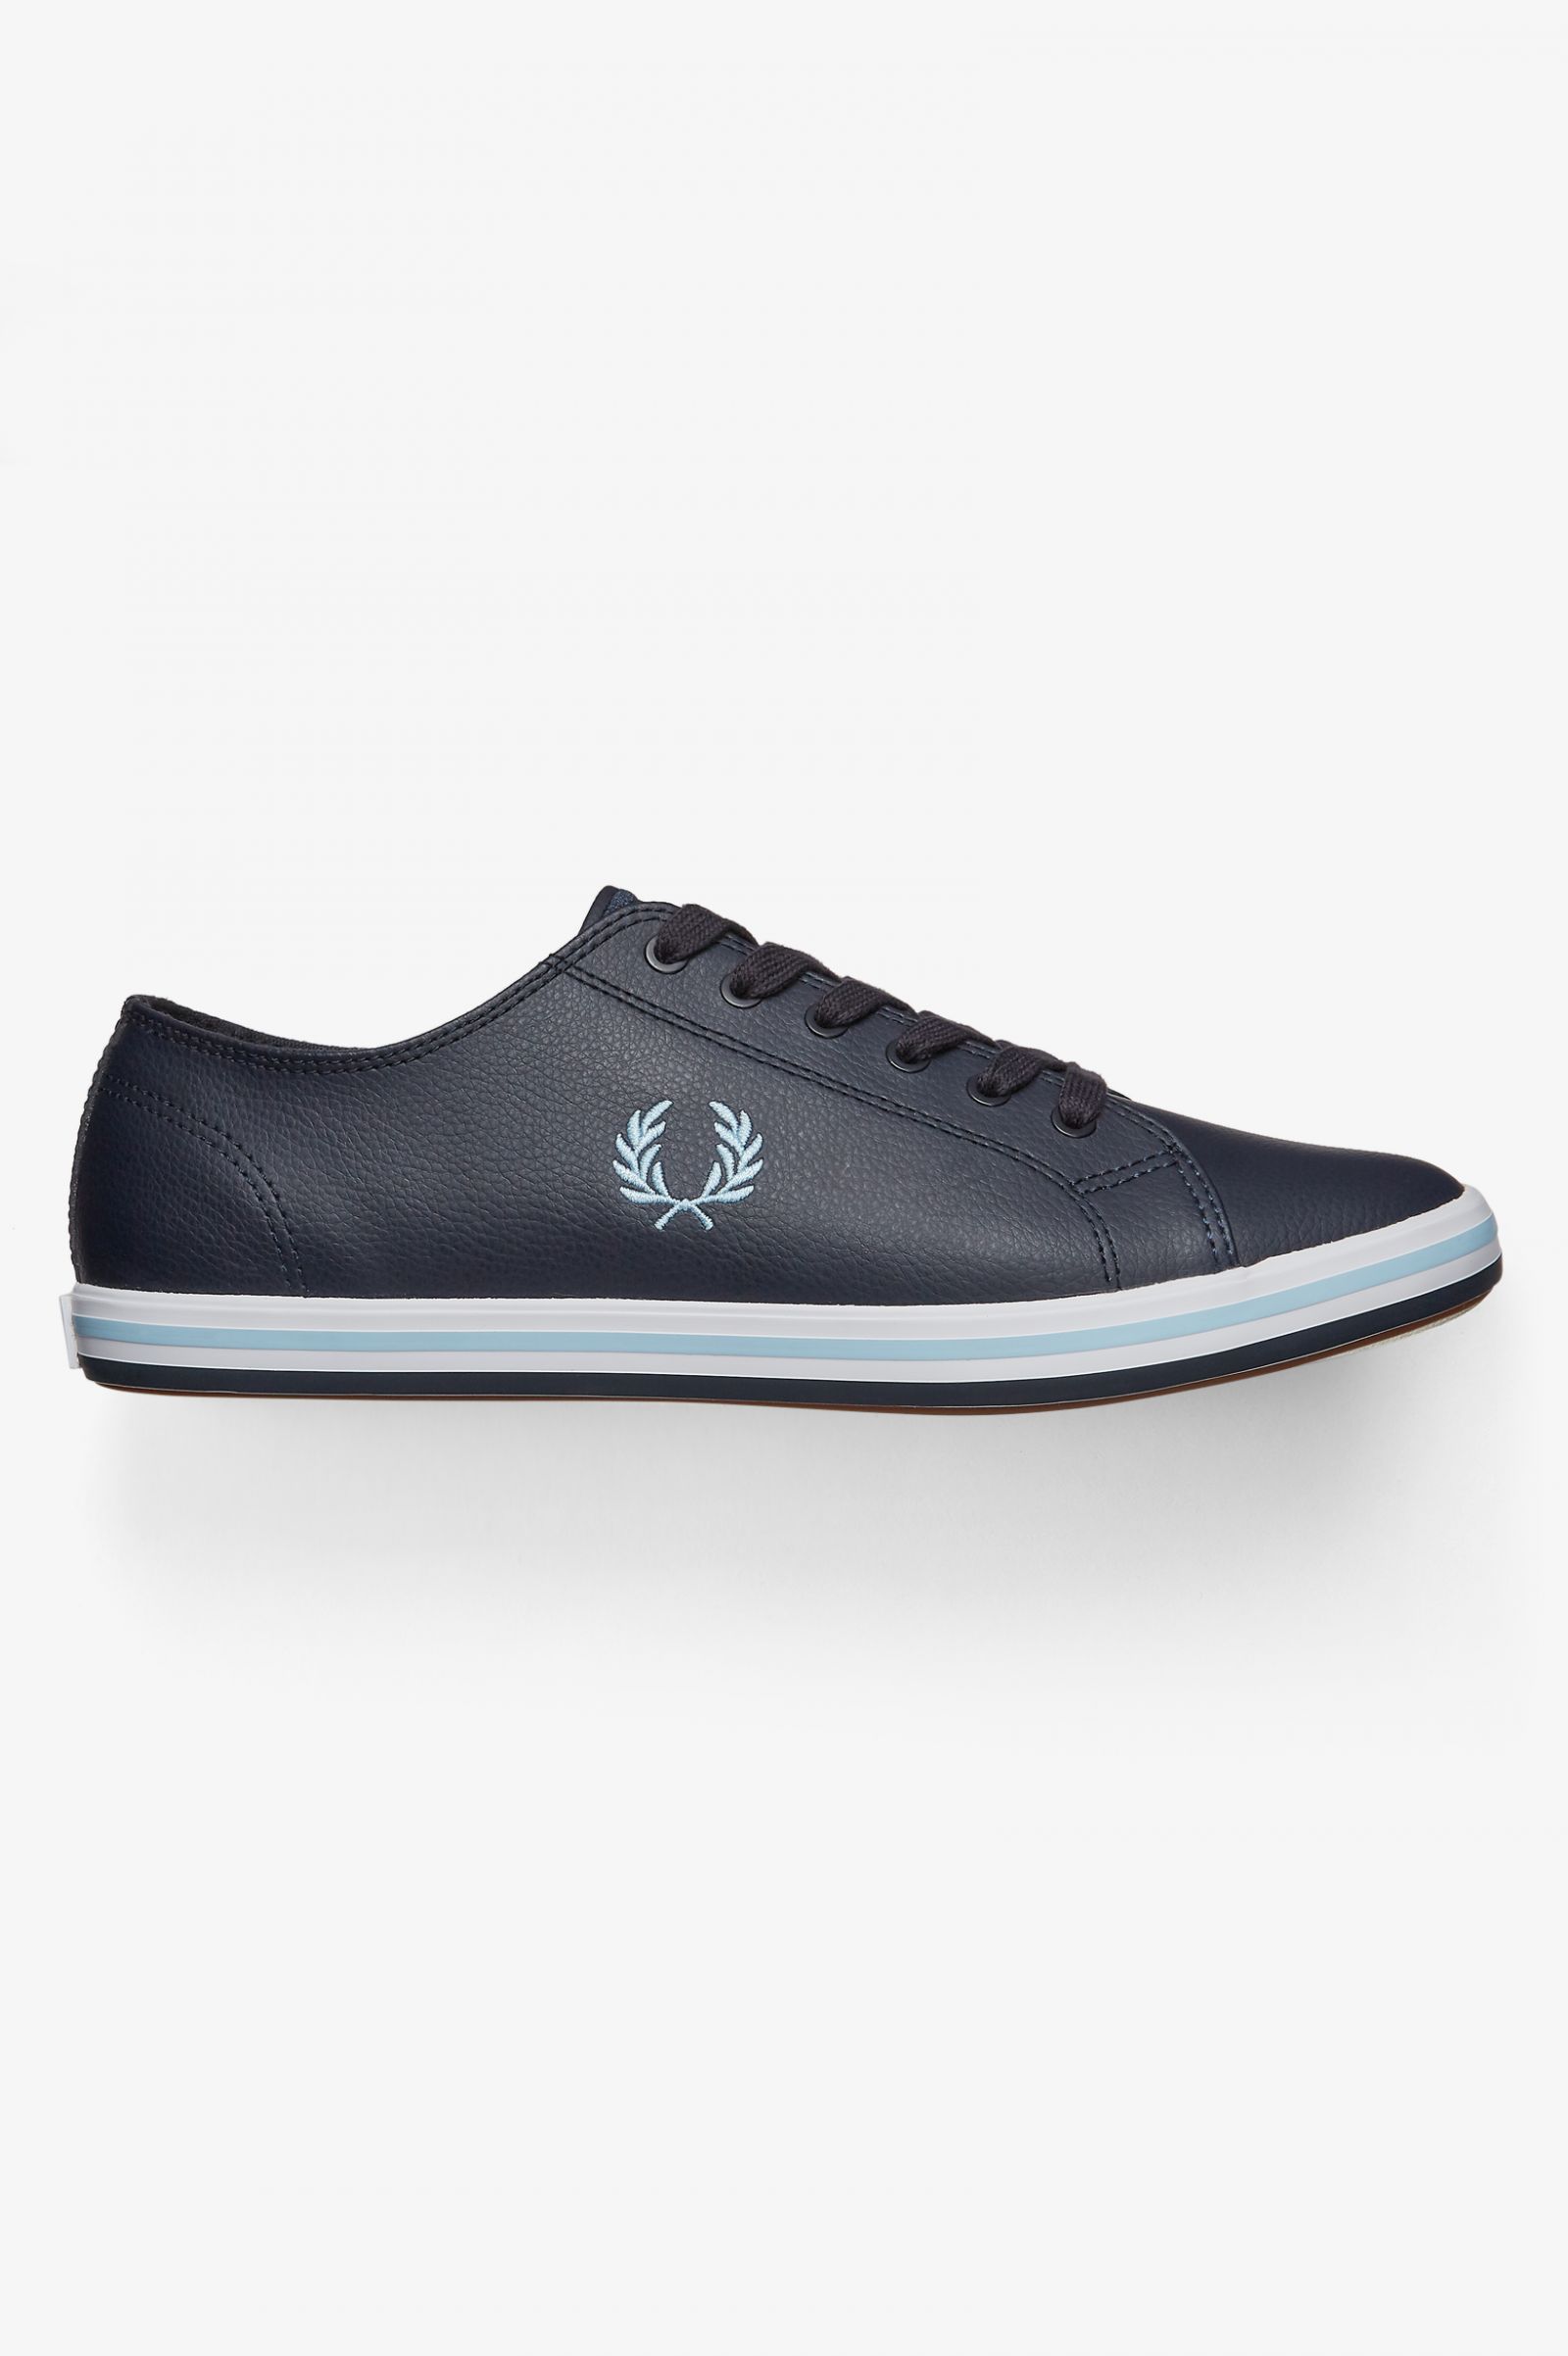 fred perry kingston twill navy